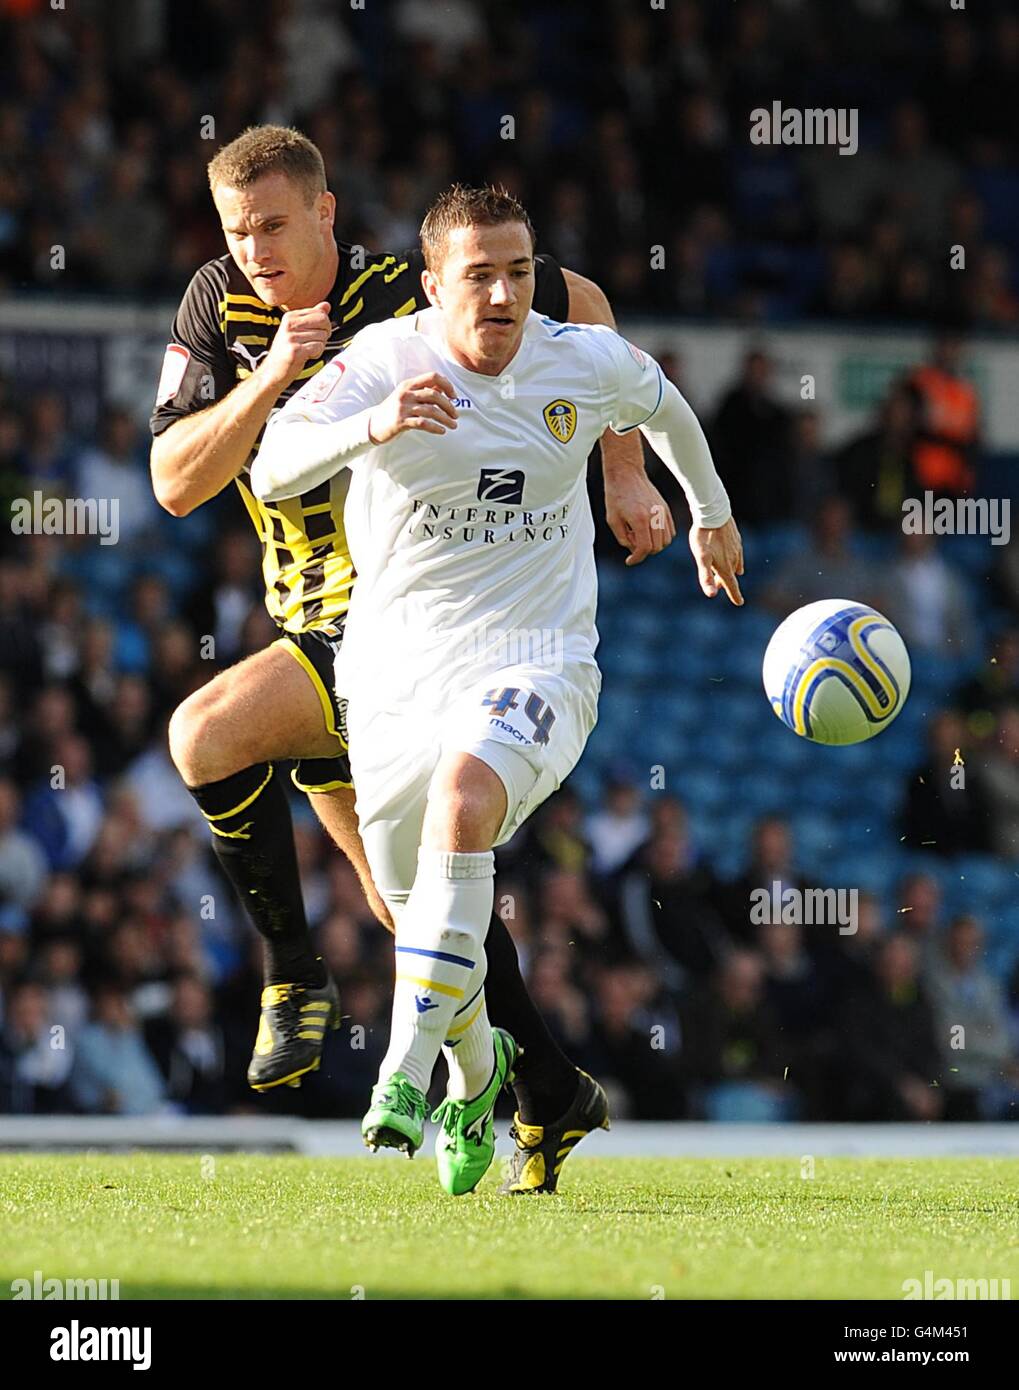 Soccer - npower Football League Championship - Leeds United v Cardiff City - Elland Road. Cardiff City's Ben Turner (left) and Leeds United's Ross McCormack battle for the ball Stock Photo